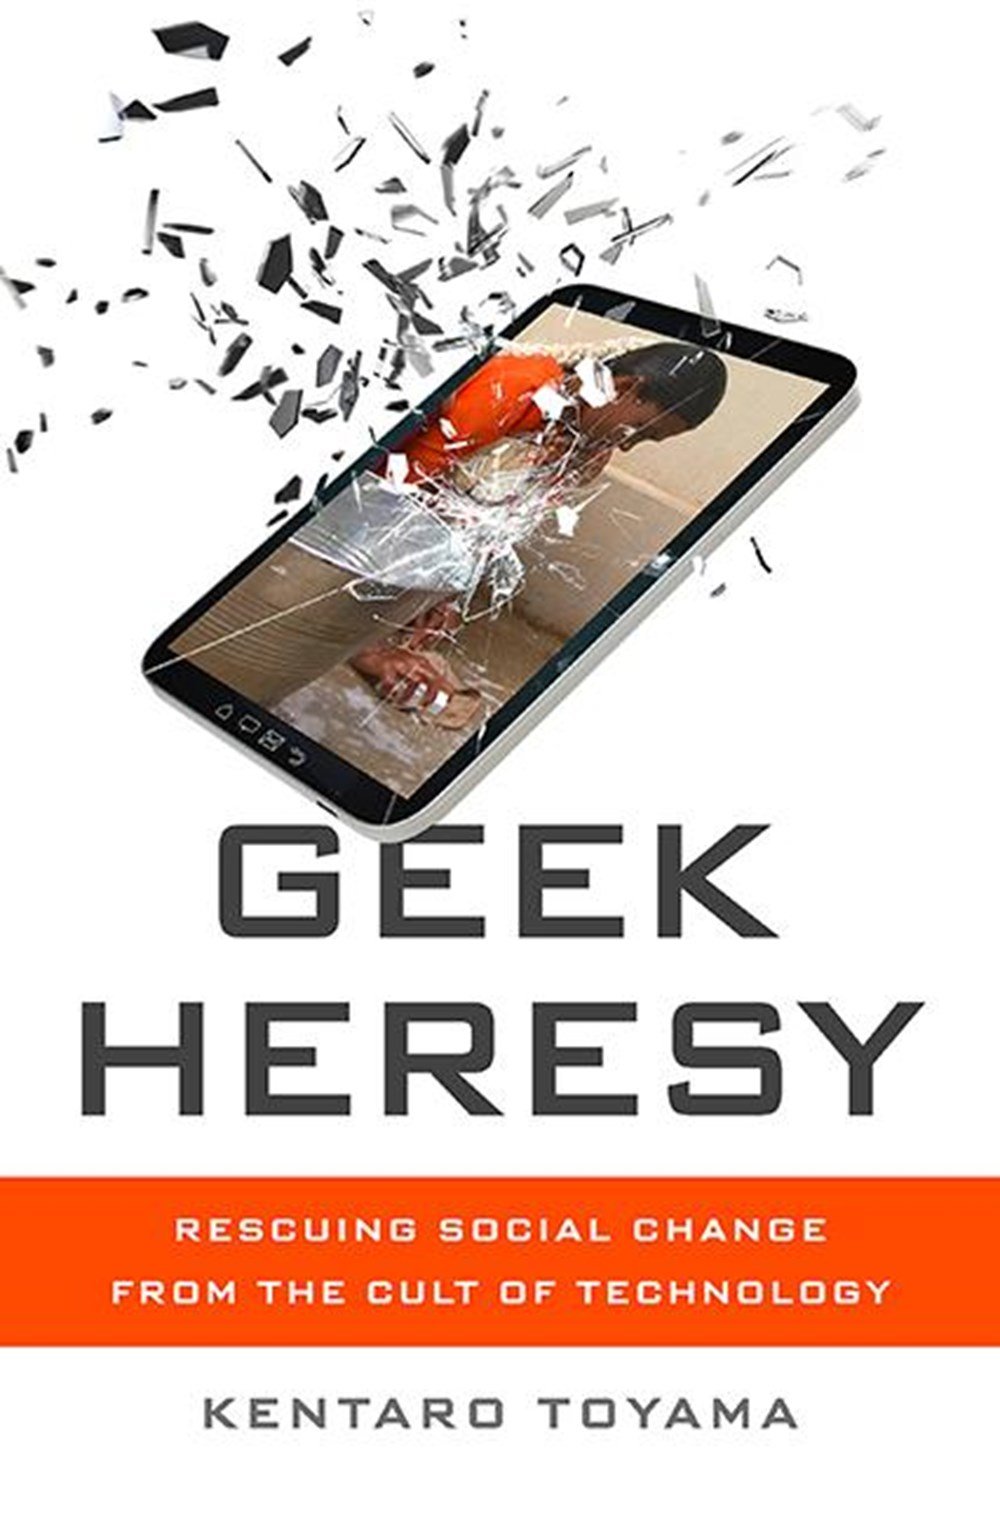 Geek Heresy Rescuing Social Change from the Cult of Technology